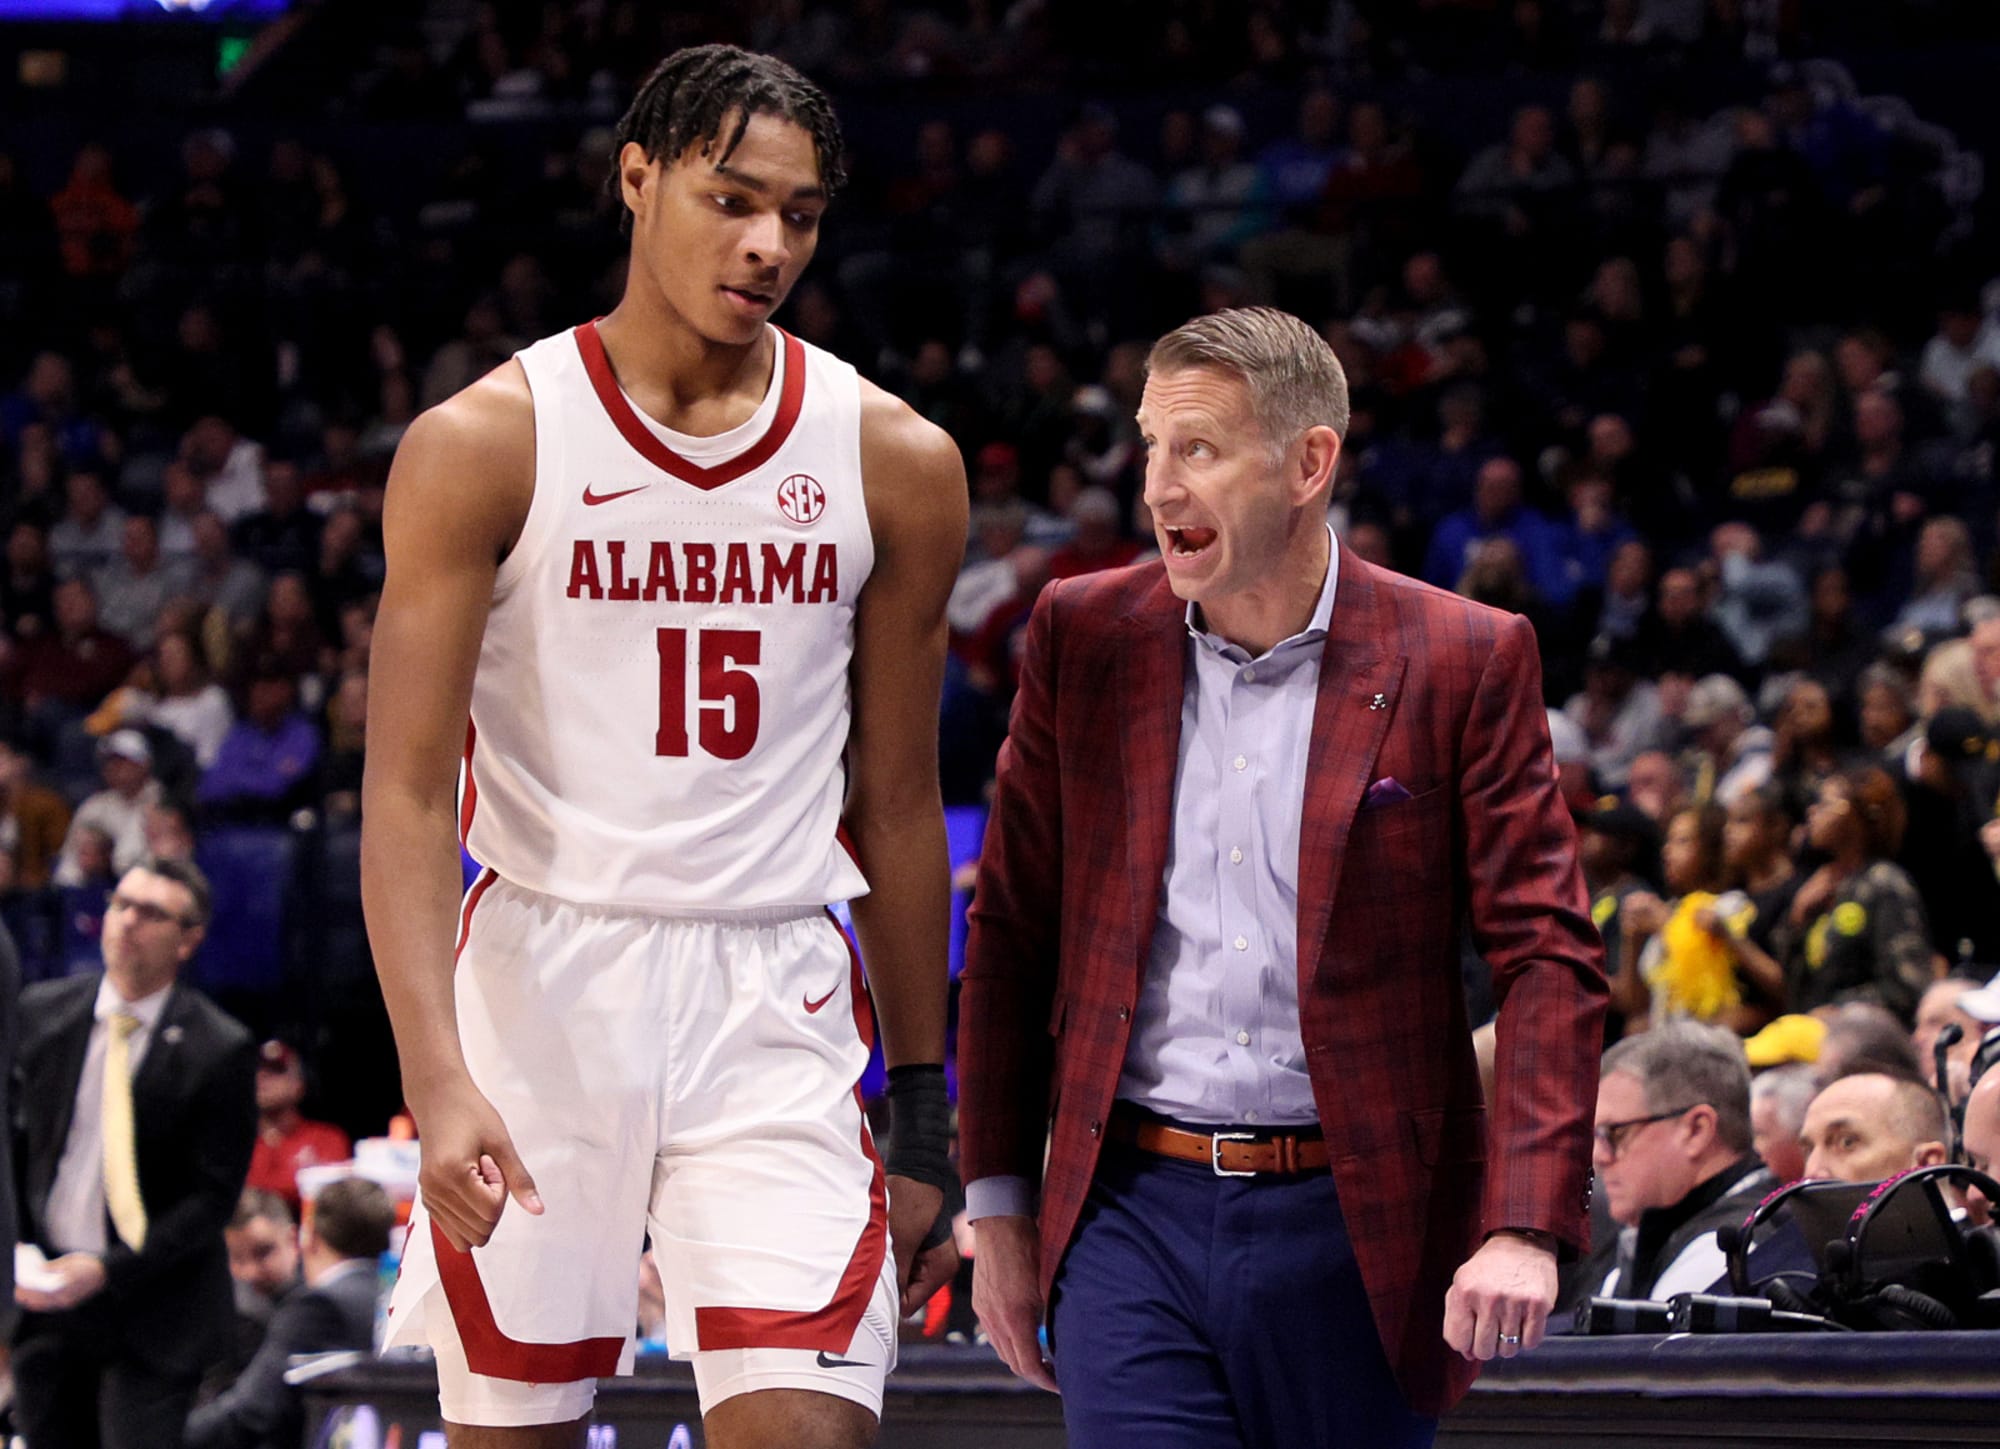 Alabama March Madness schedule When does the Crimson Tide play next